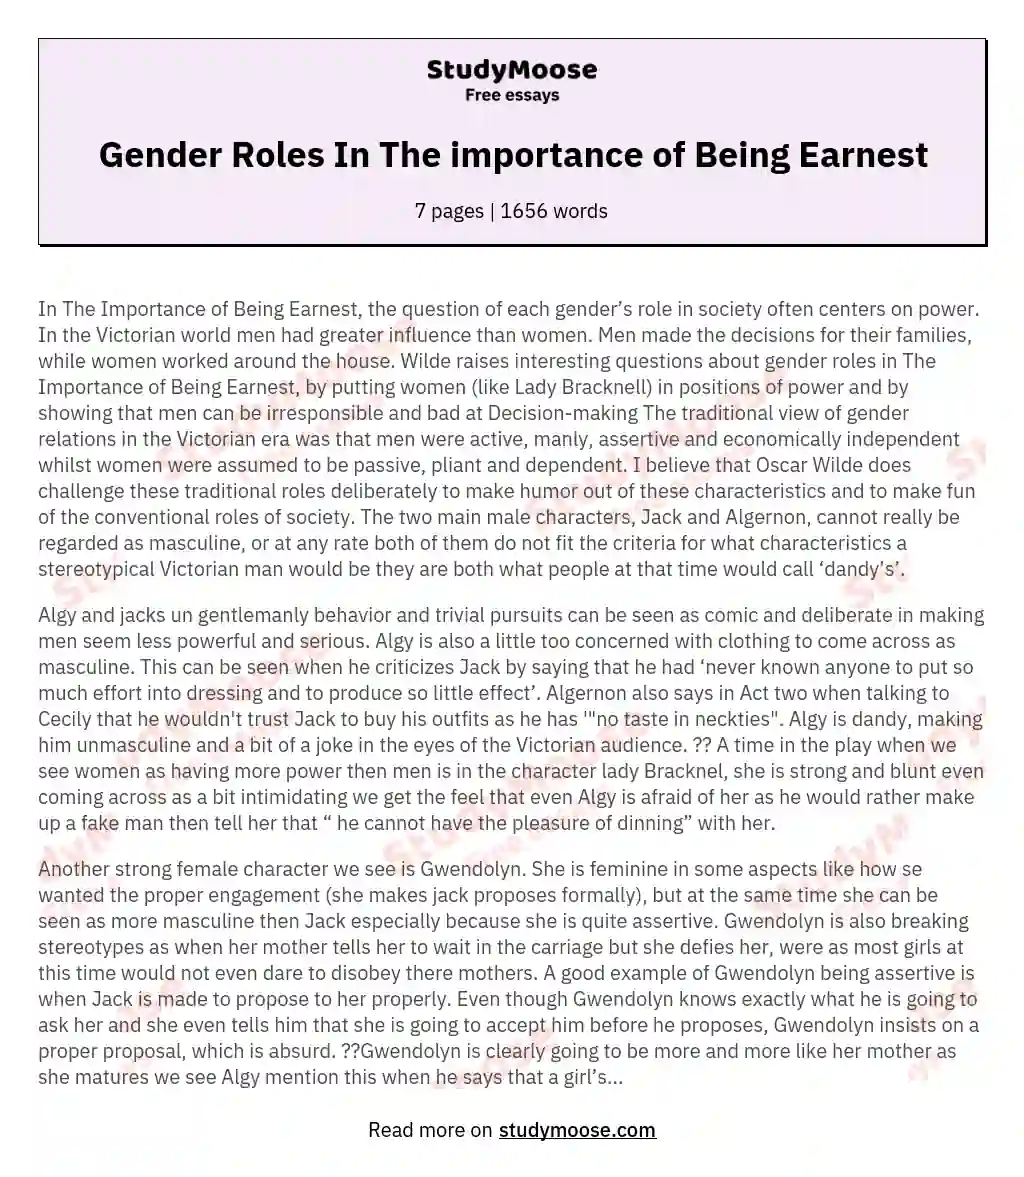 Gender Roles In The importance of Being Earnest essay